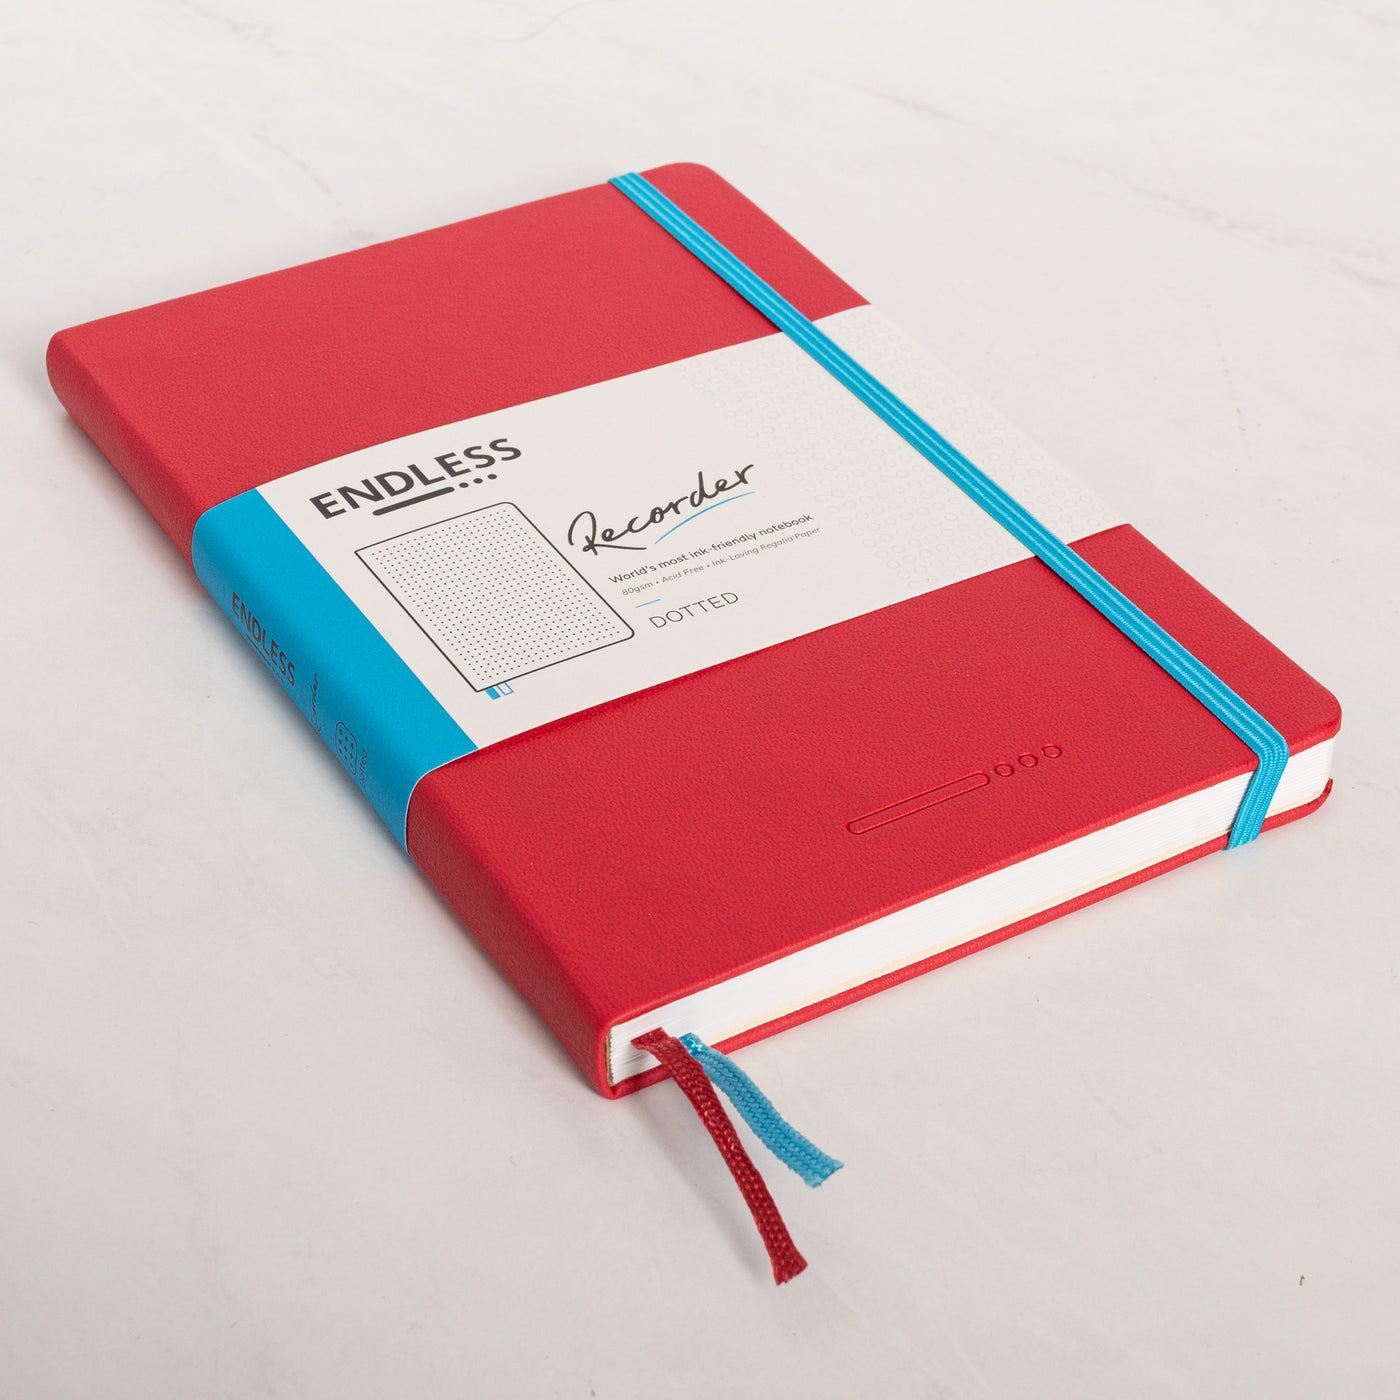 Endless Recorder Crimson Sky Red Dotted Regalia Notebook notebook